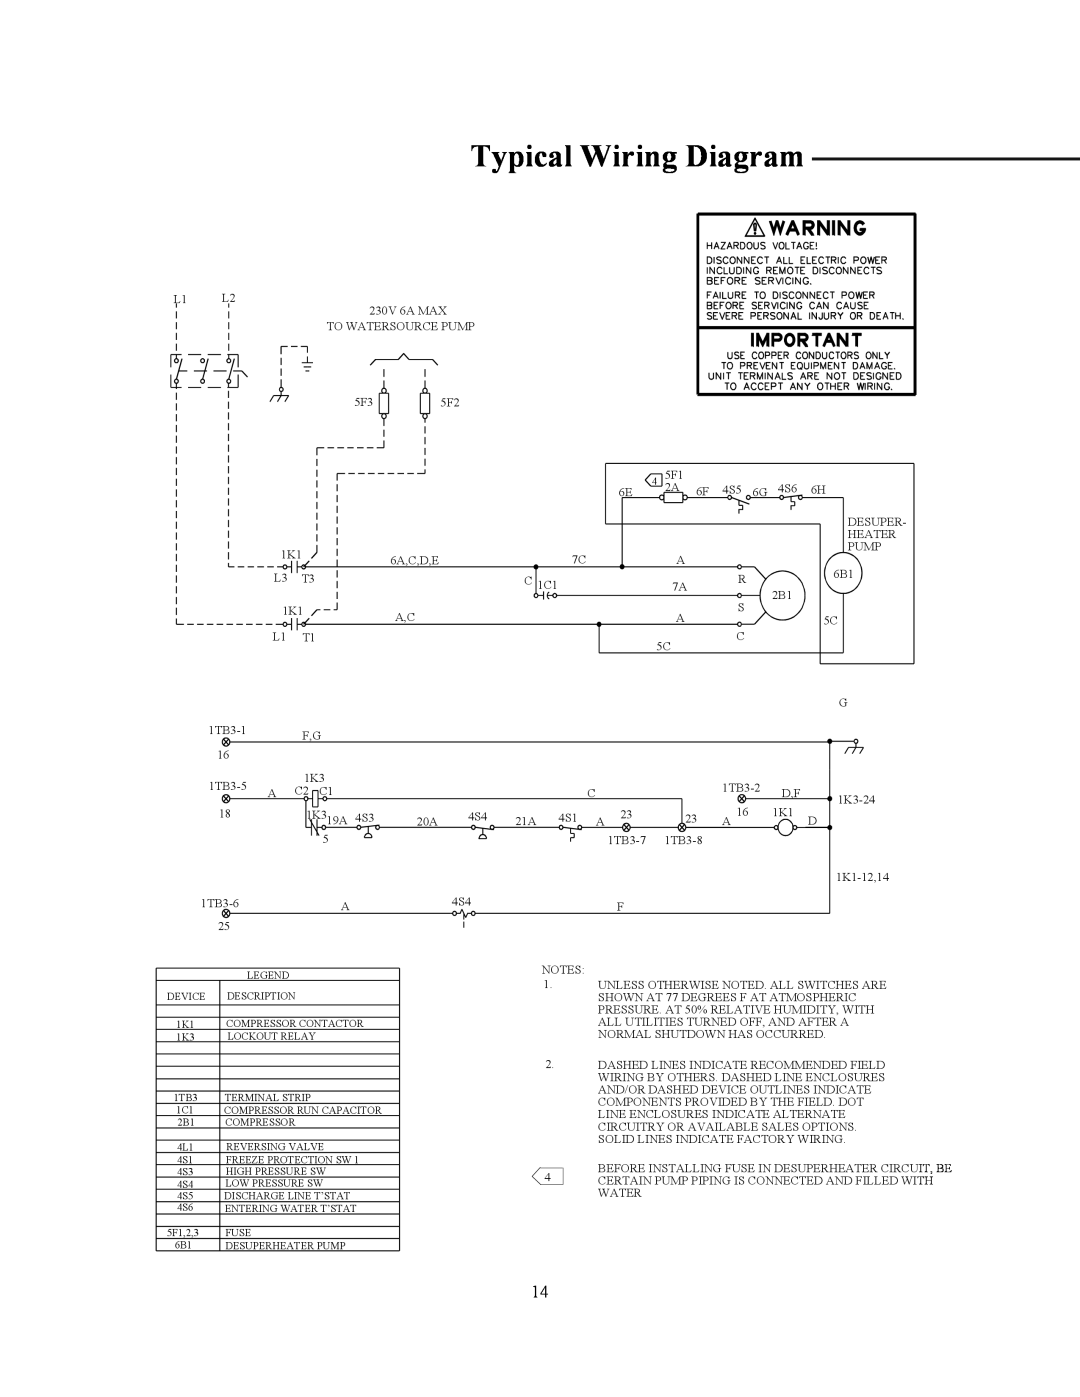 Trane GSSD specifications Typical Wiring Diagram 